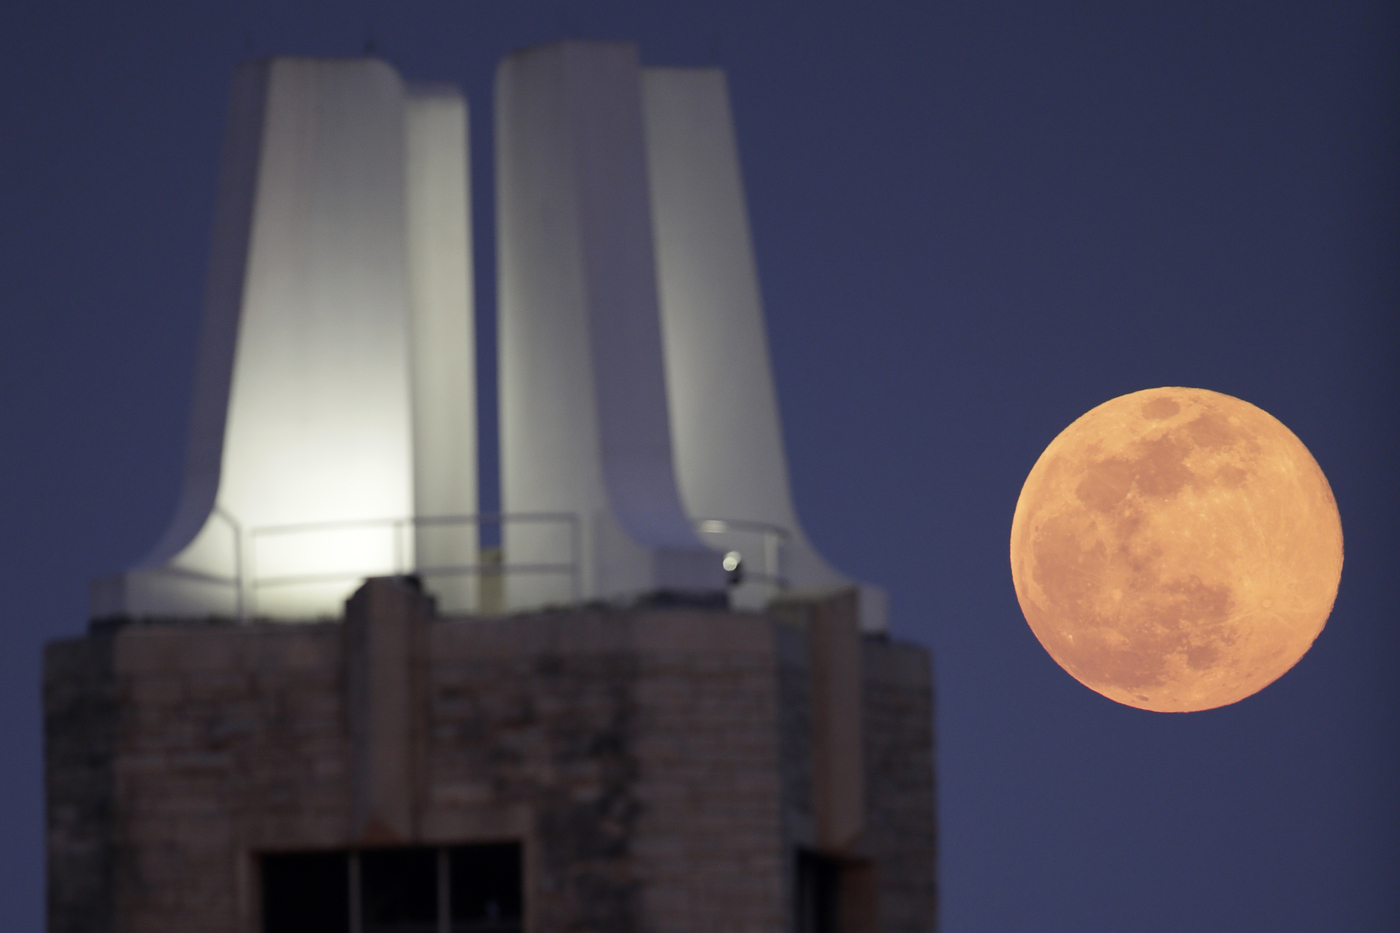 A supermoon rises behind the campanile on the University of Kansas campus In Lawrence, Kan., Tuesday, April 7, 2020. (AP Photo/Orlin Wagner)